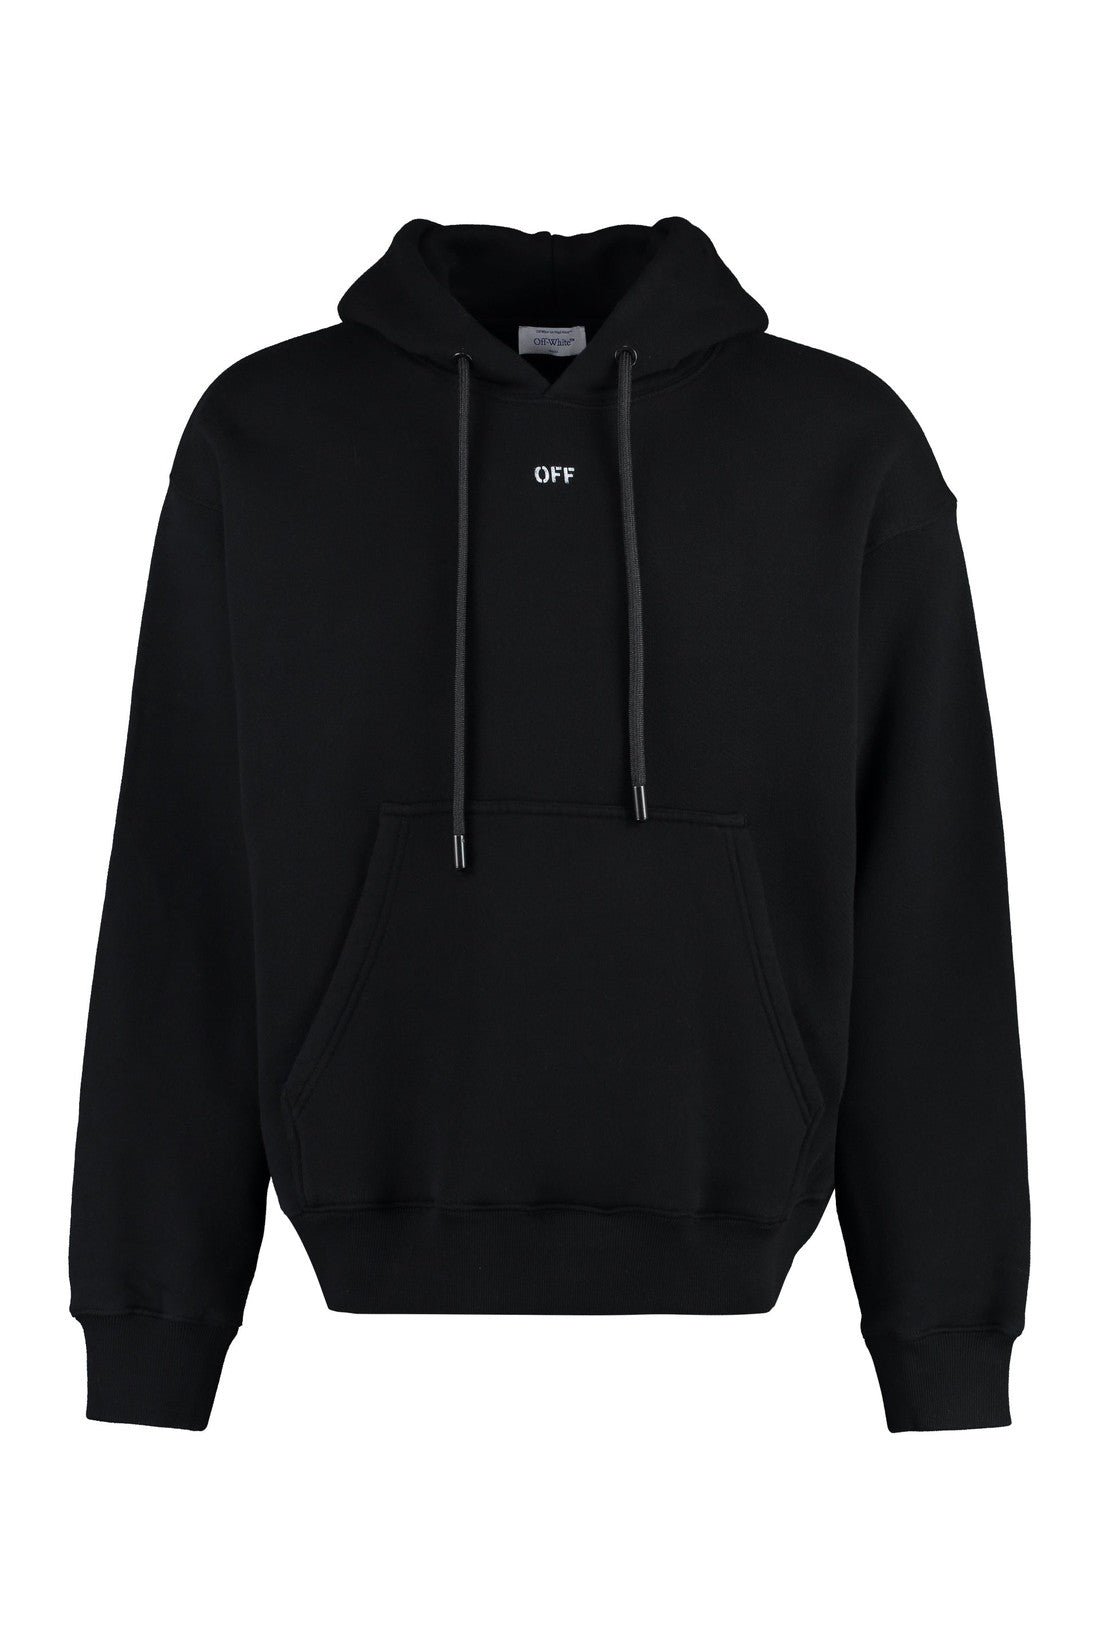 Off-White-OUTLET-SALE-Hooded sweatshirt-ARCHIVIST